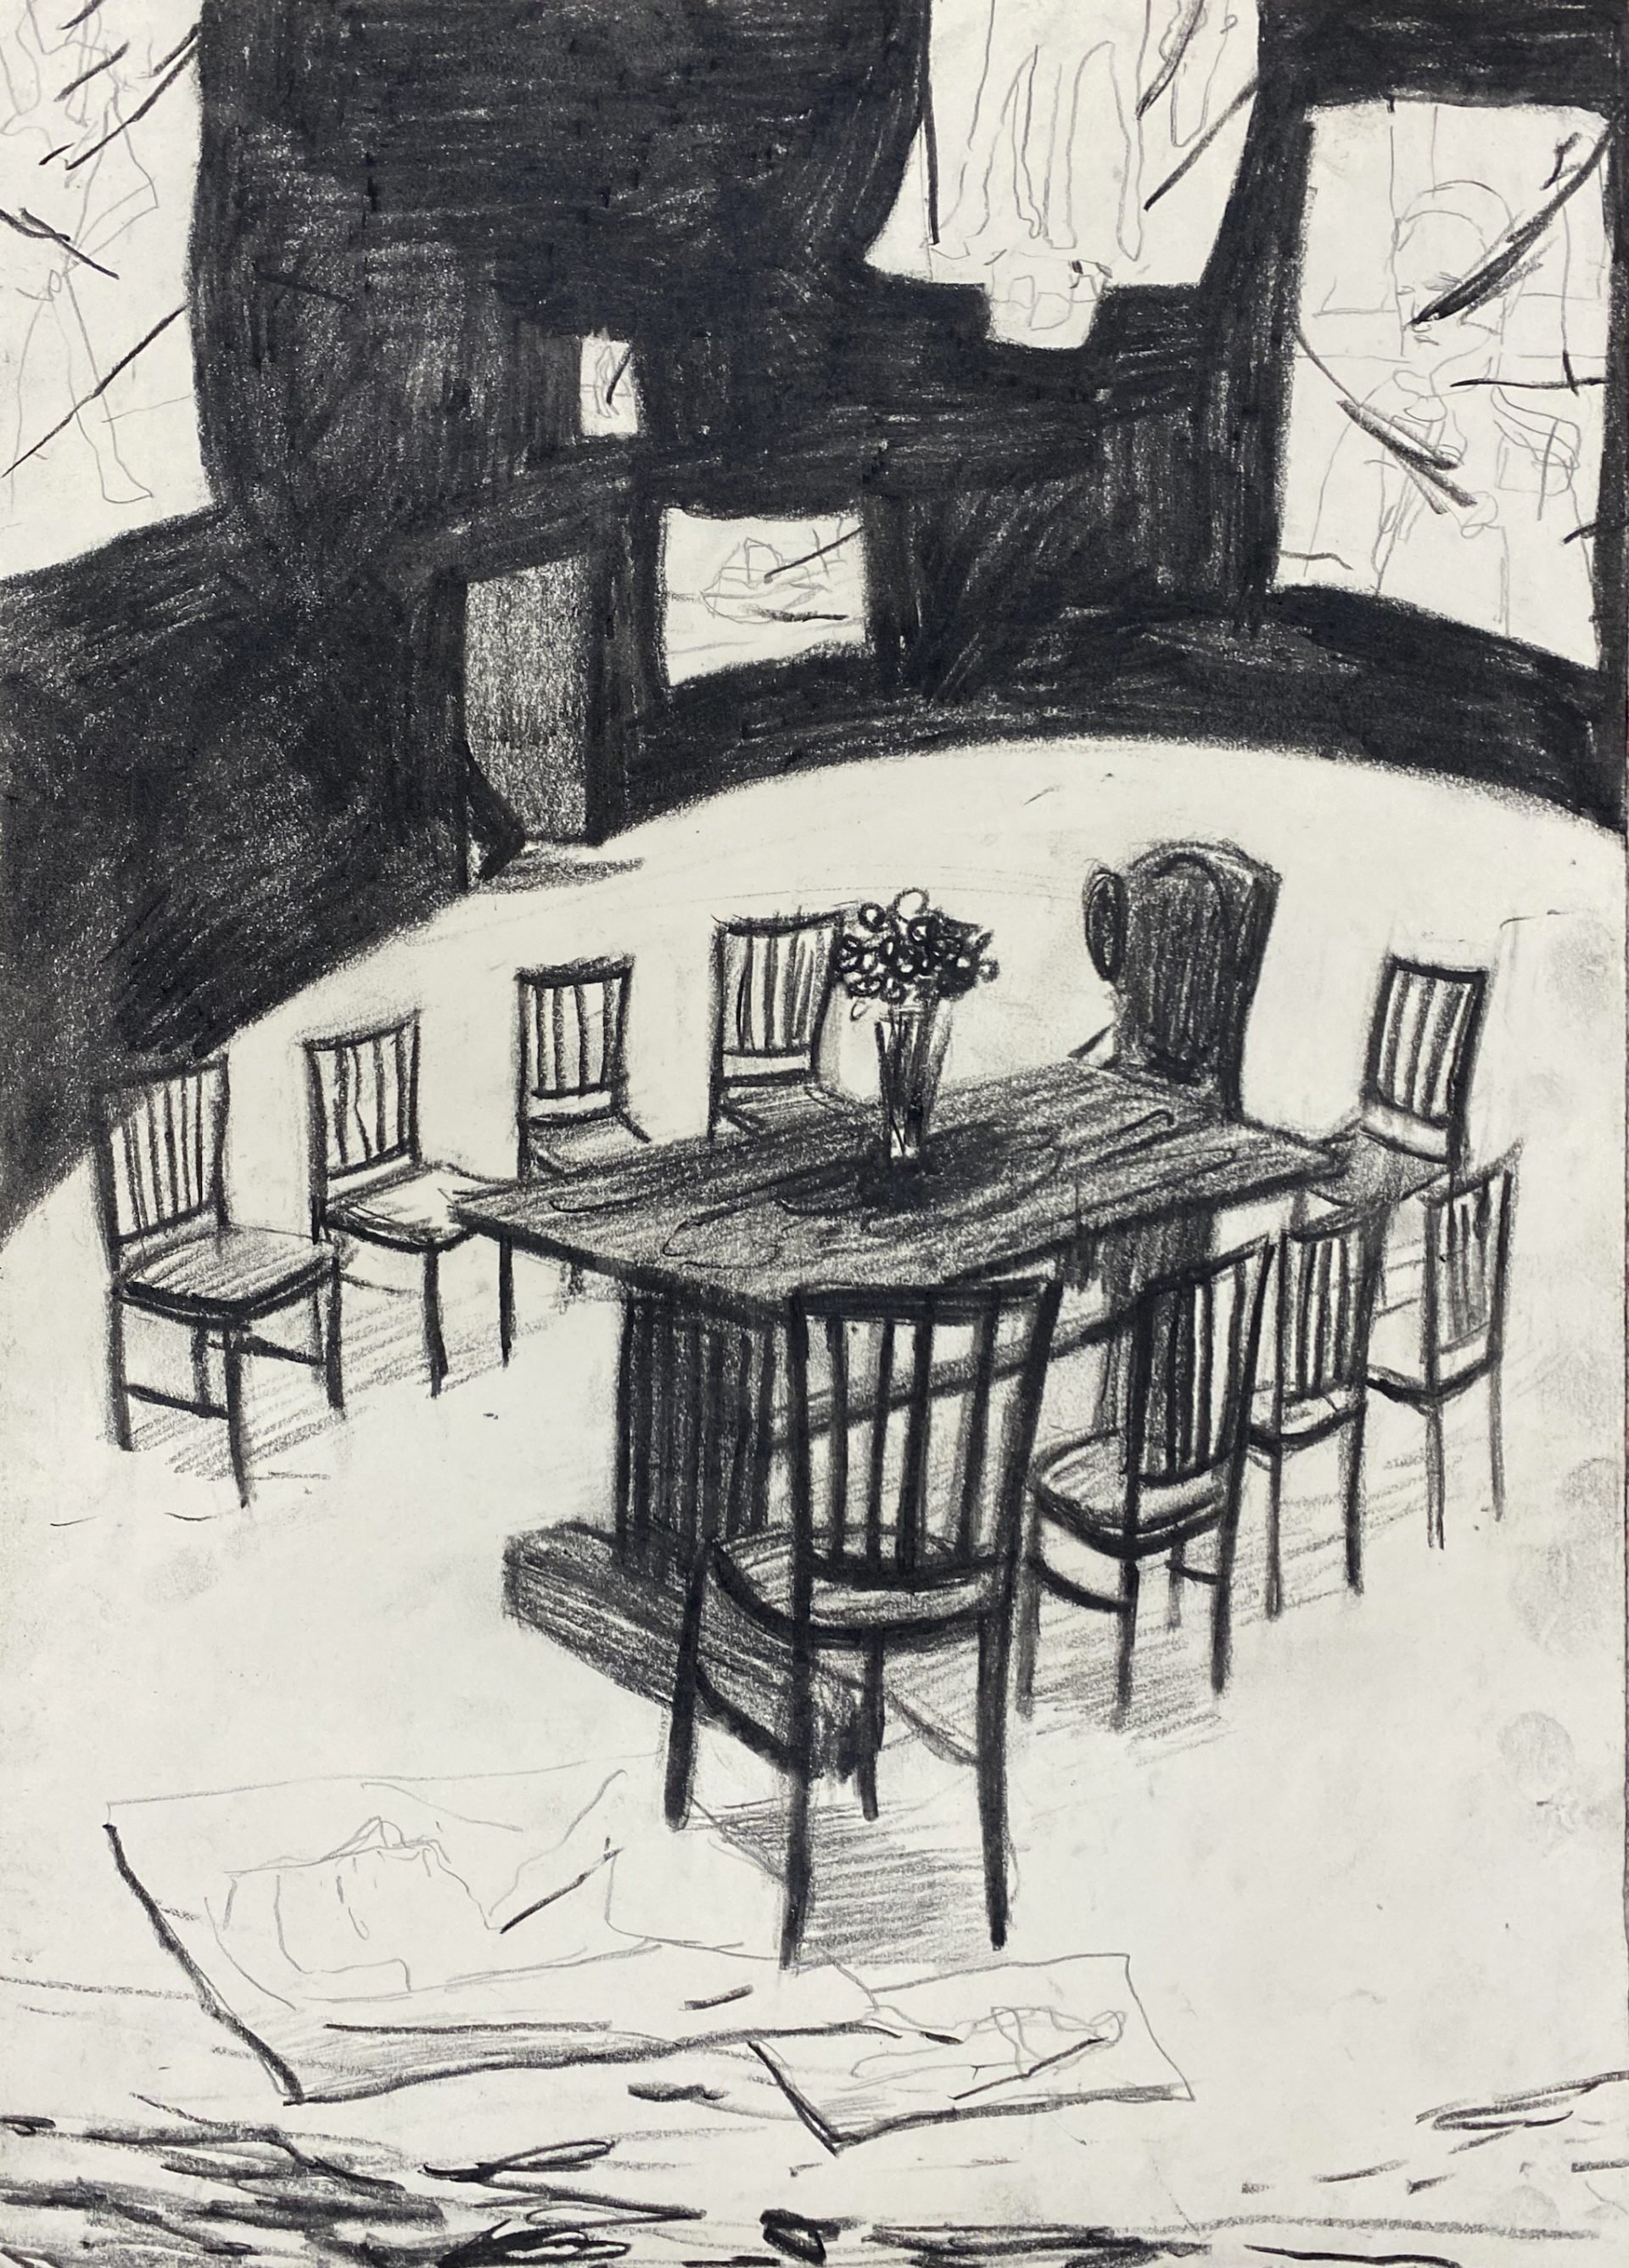   The Best Laid Plans , charcoal on paper, (45 x 32cm) 2022 